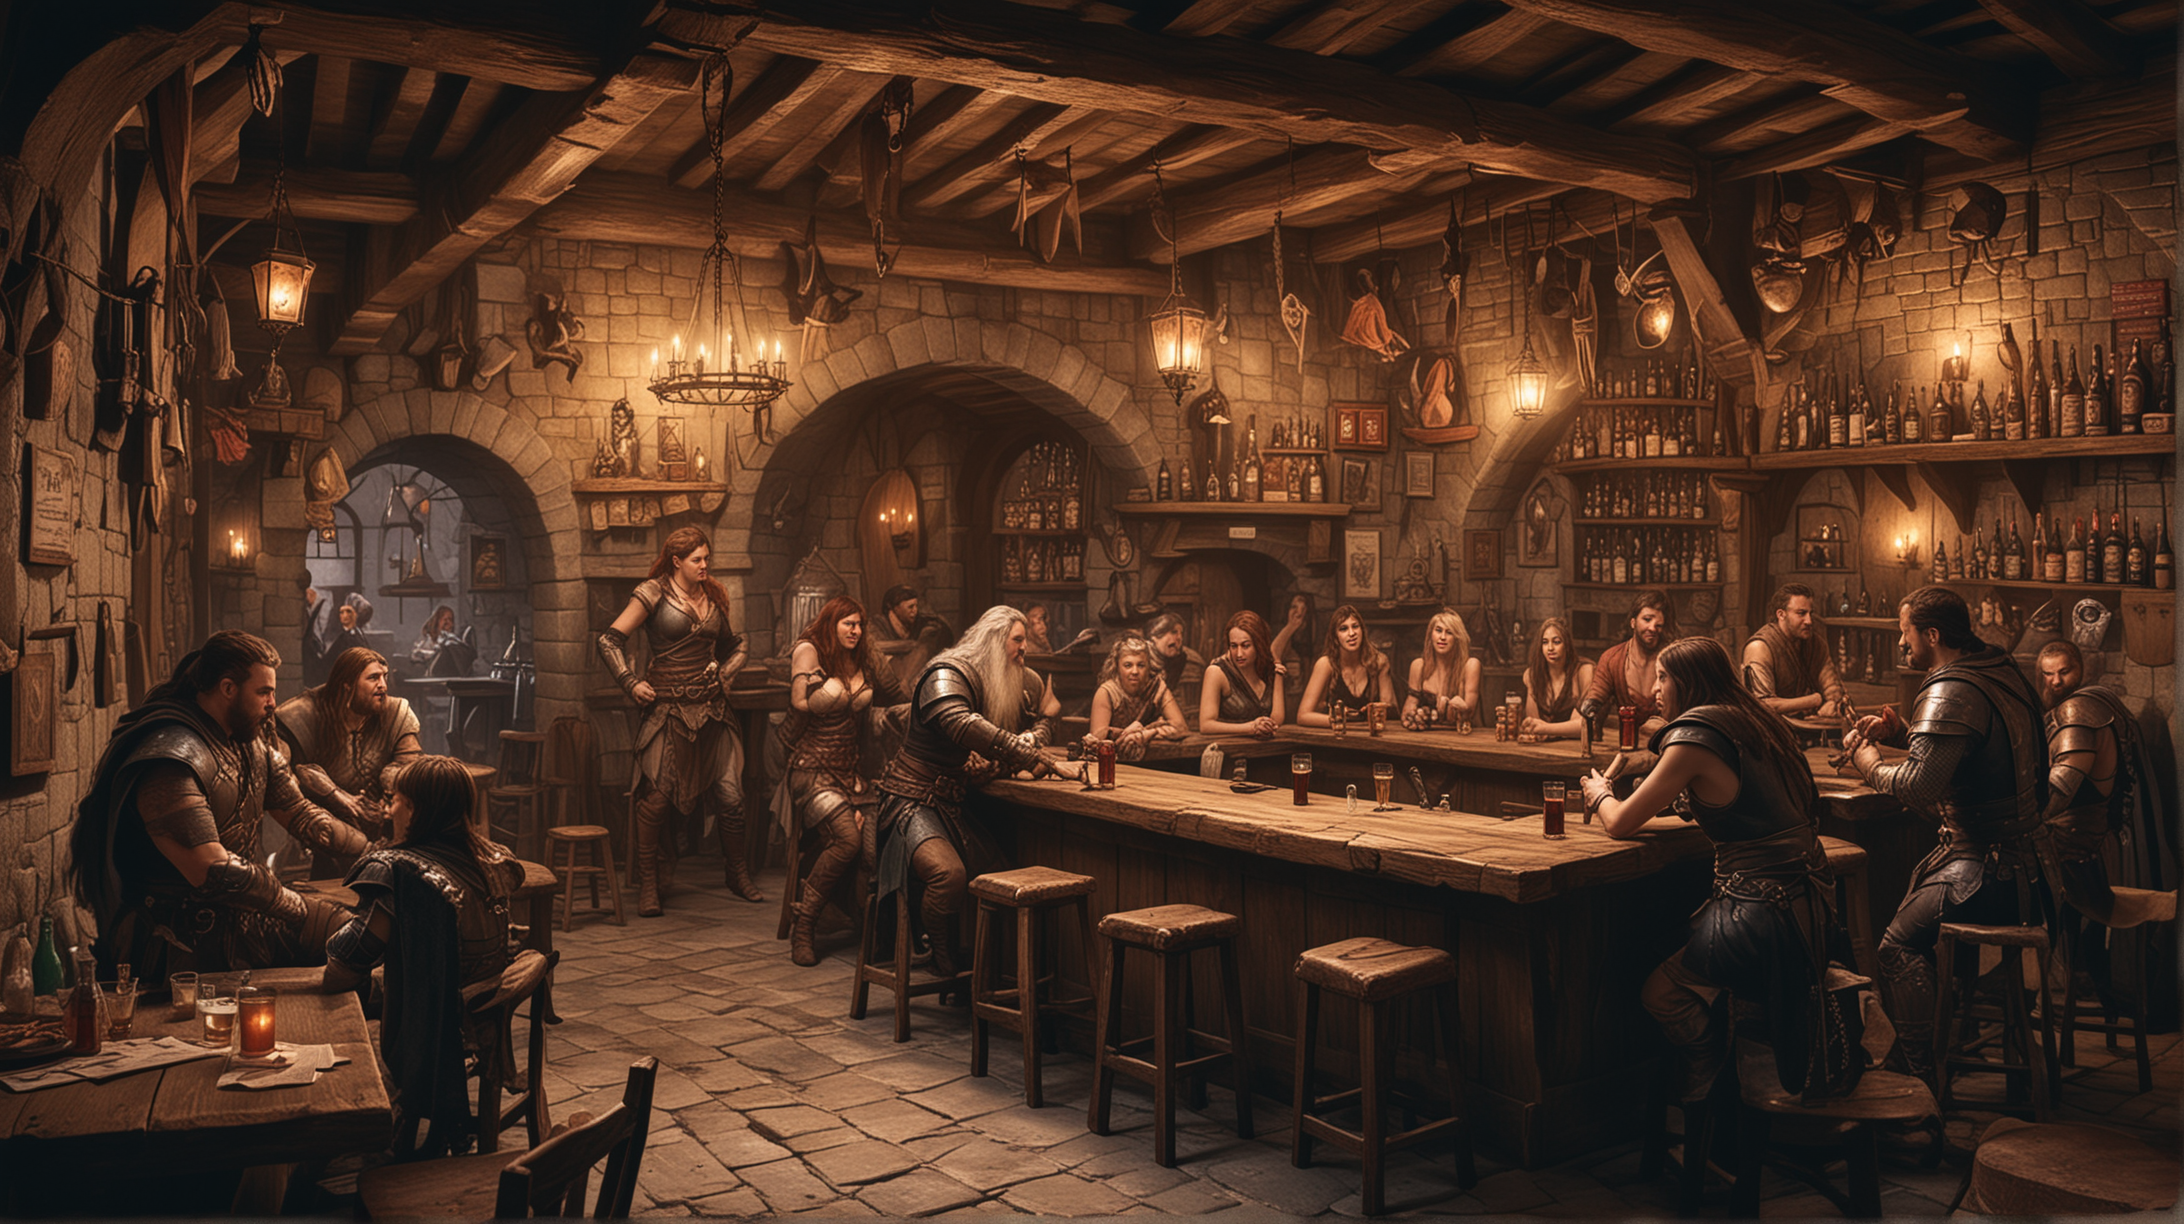 Medieval Bar with Dungeons and Dragons Characters in Fantasy Attire